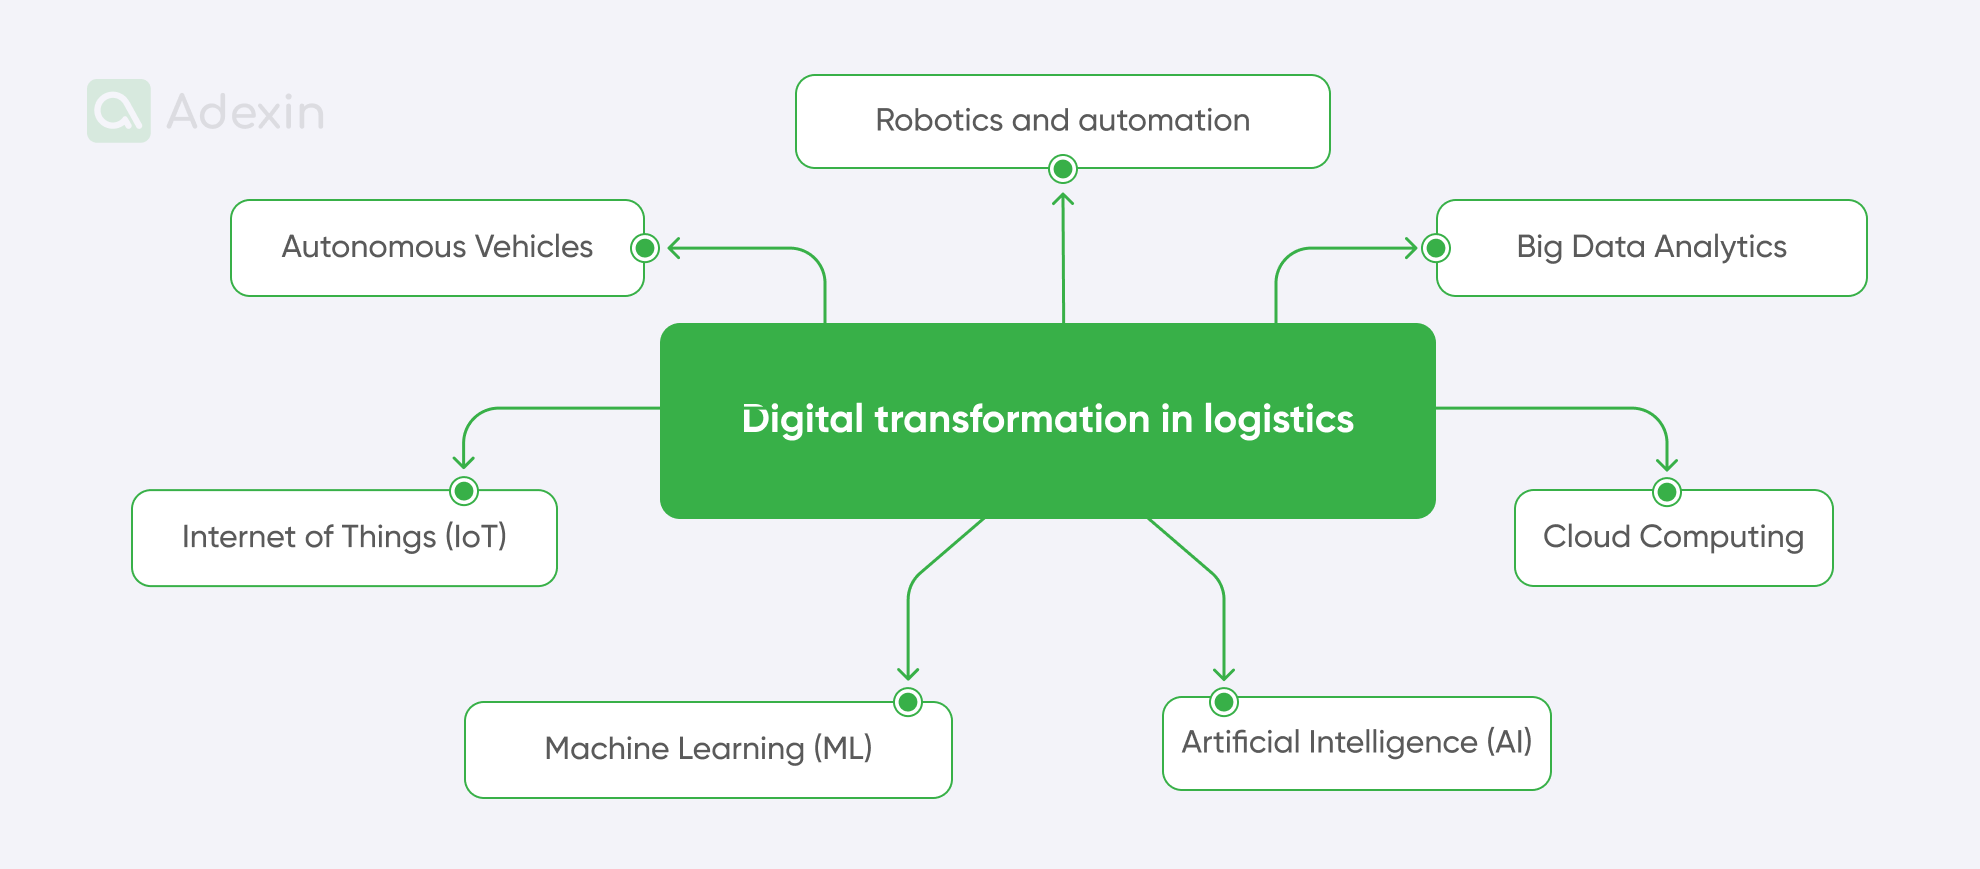 Components of the digital ecosystem in logistics